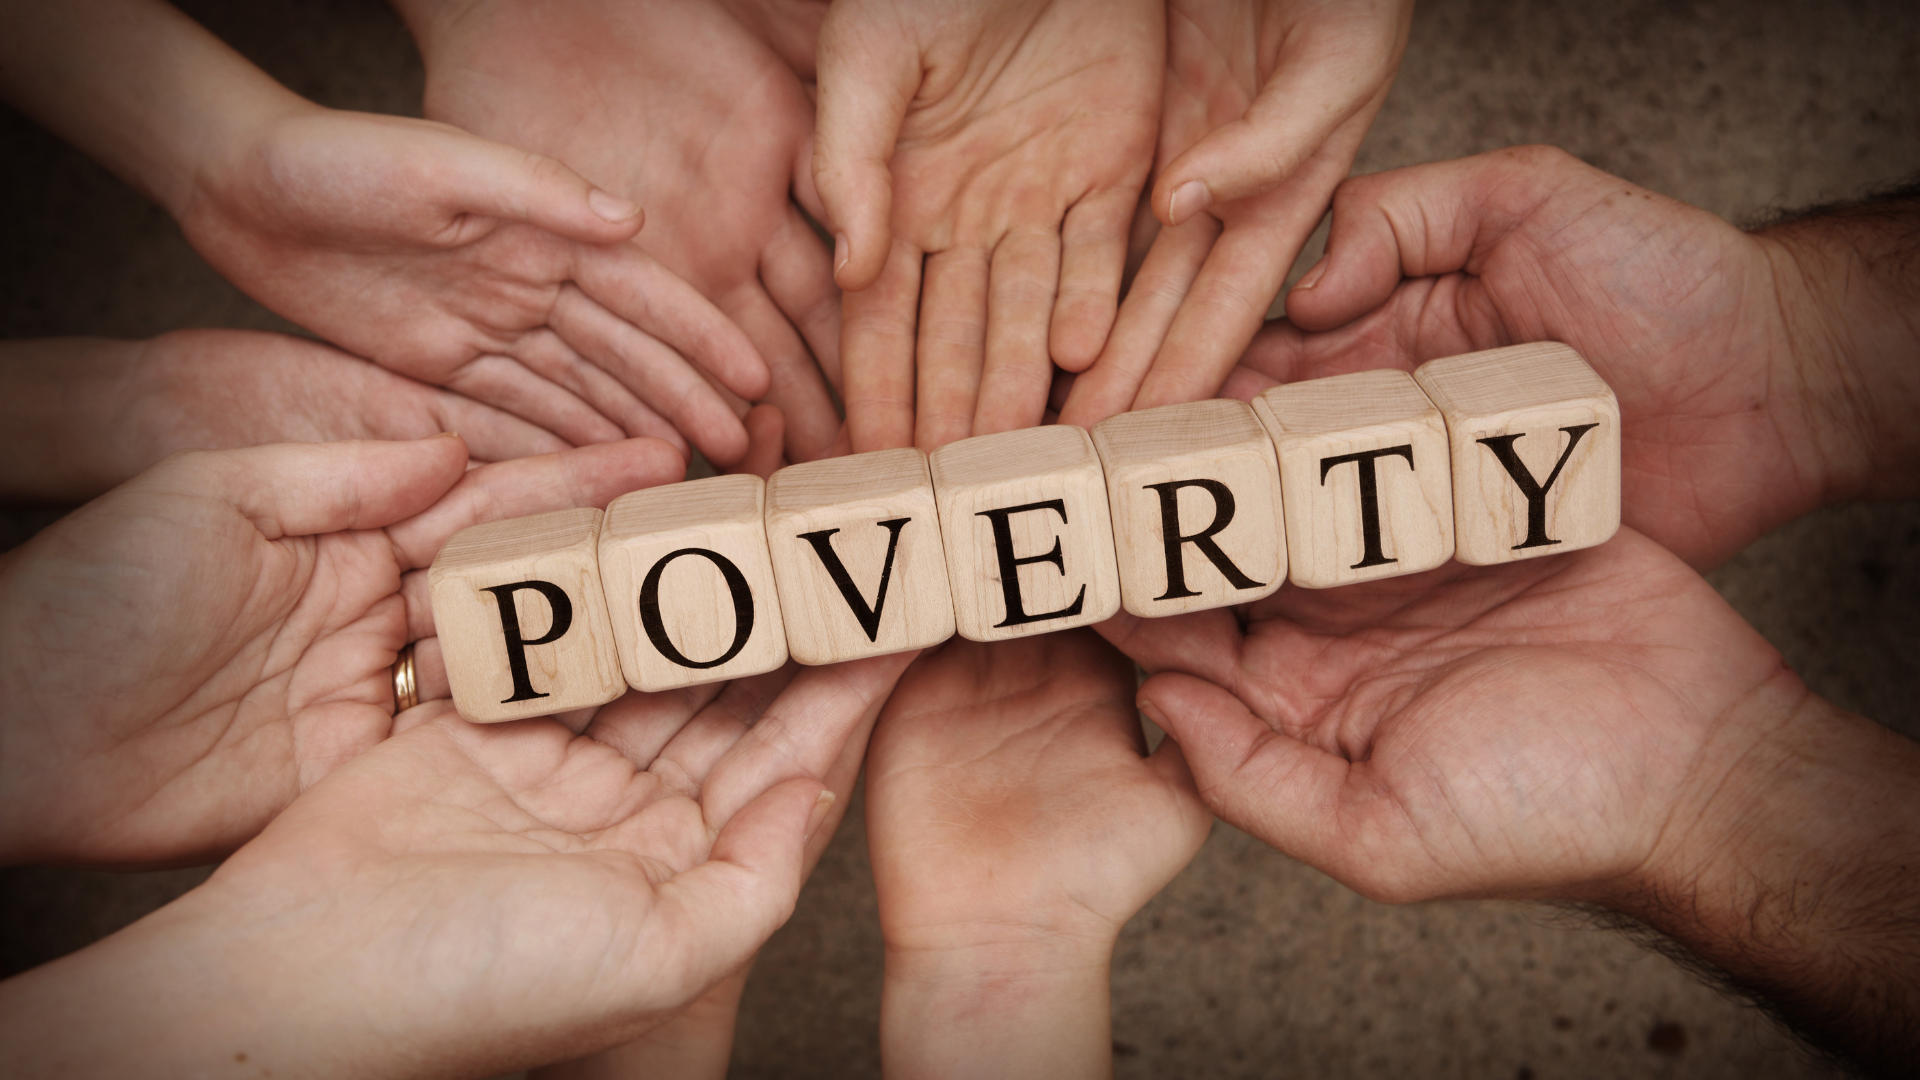 Parents – share your views on how we can solve poverty in Northern Ireland